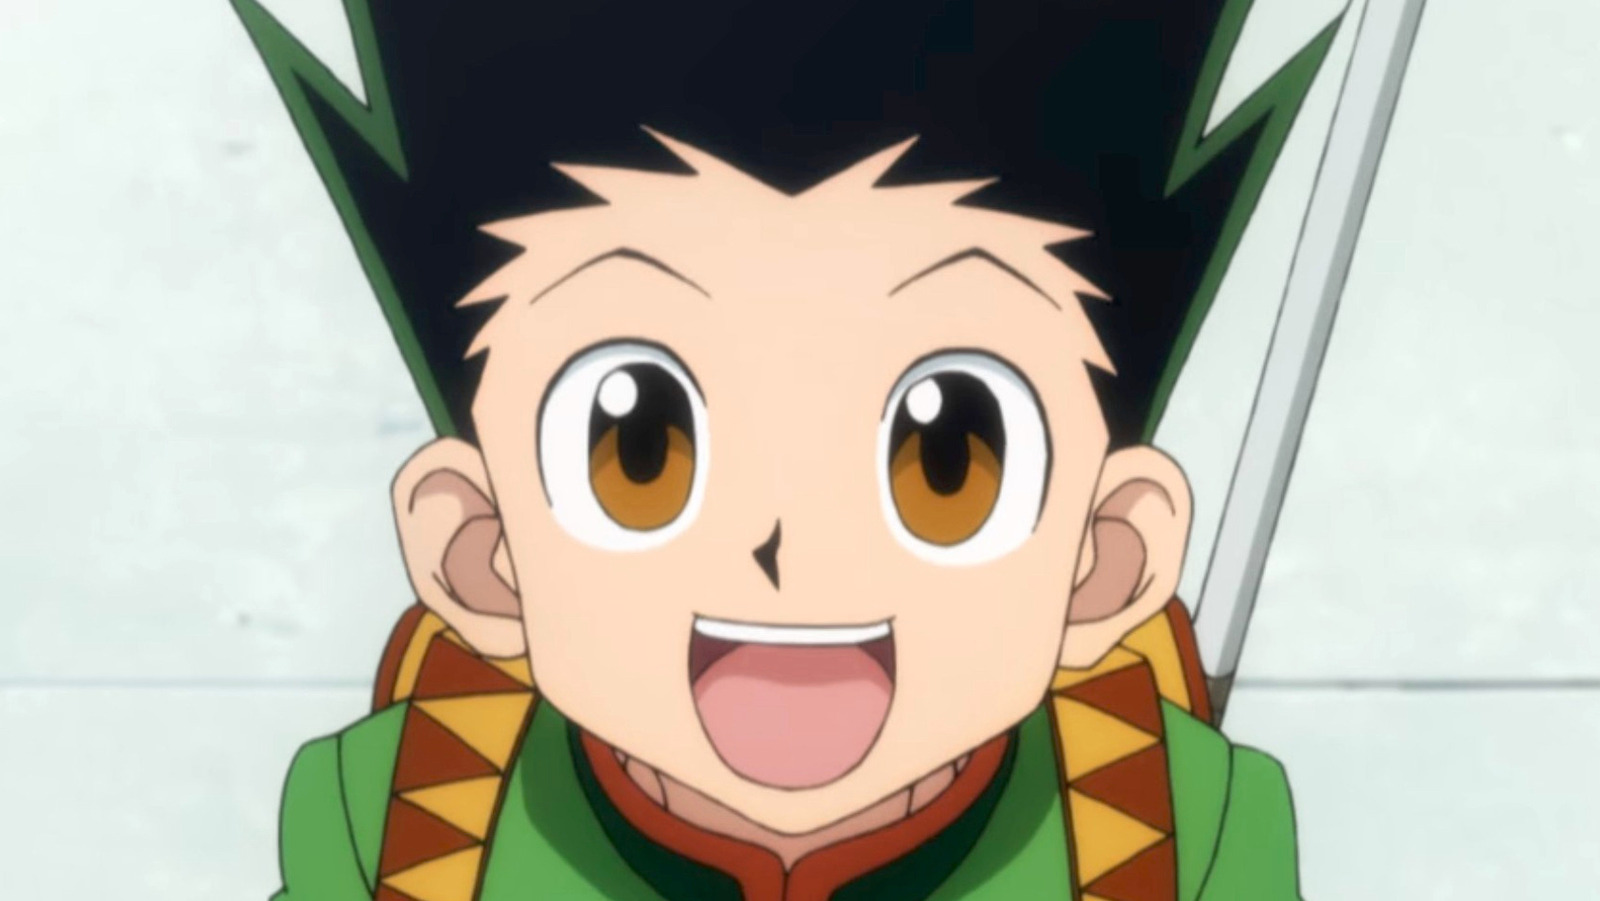 Hunter X Hunter Fans All Seem To Agree On Skipping The 1999 Series